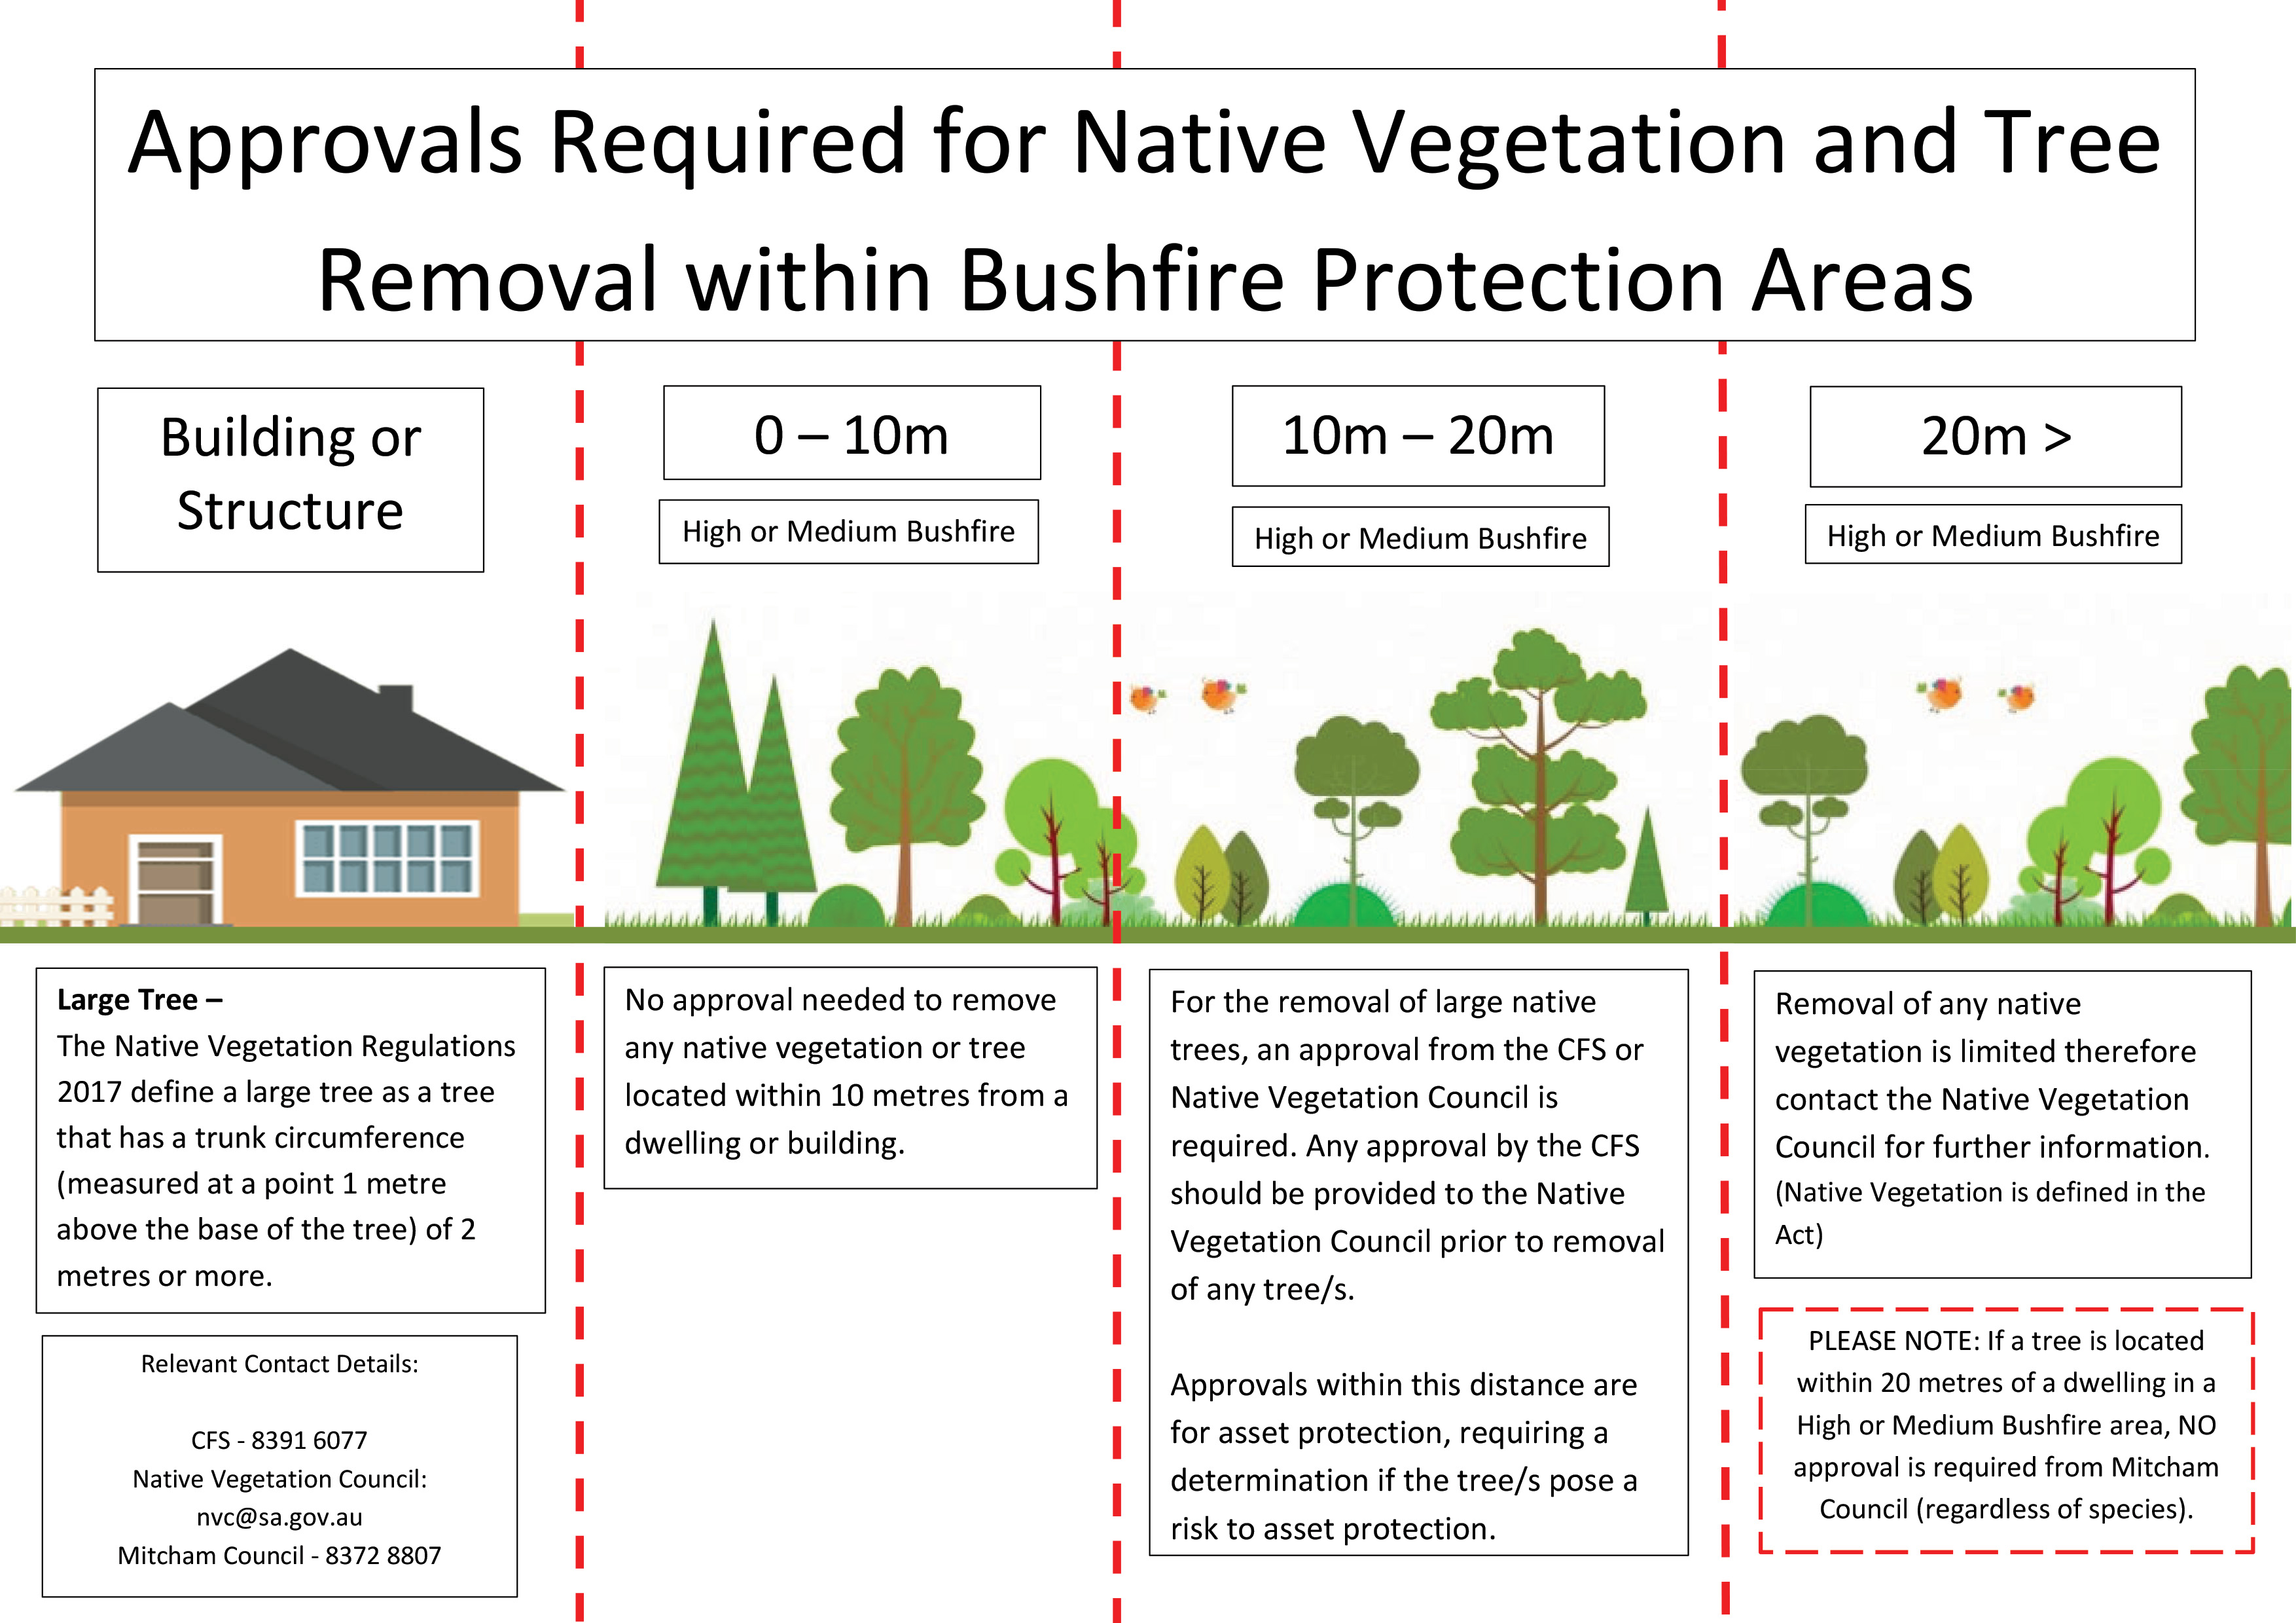 Tree removal within bushfire protection areas